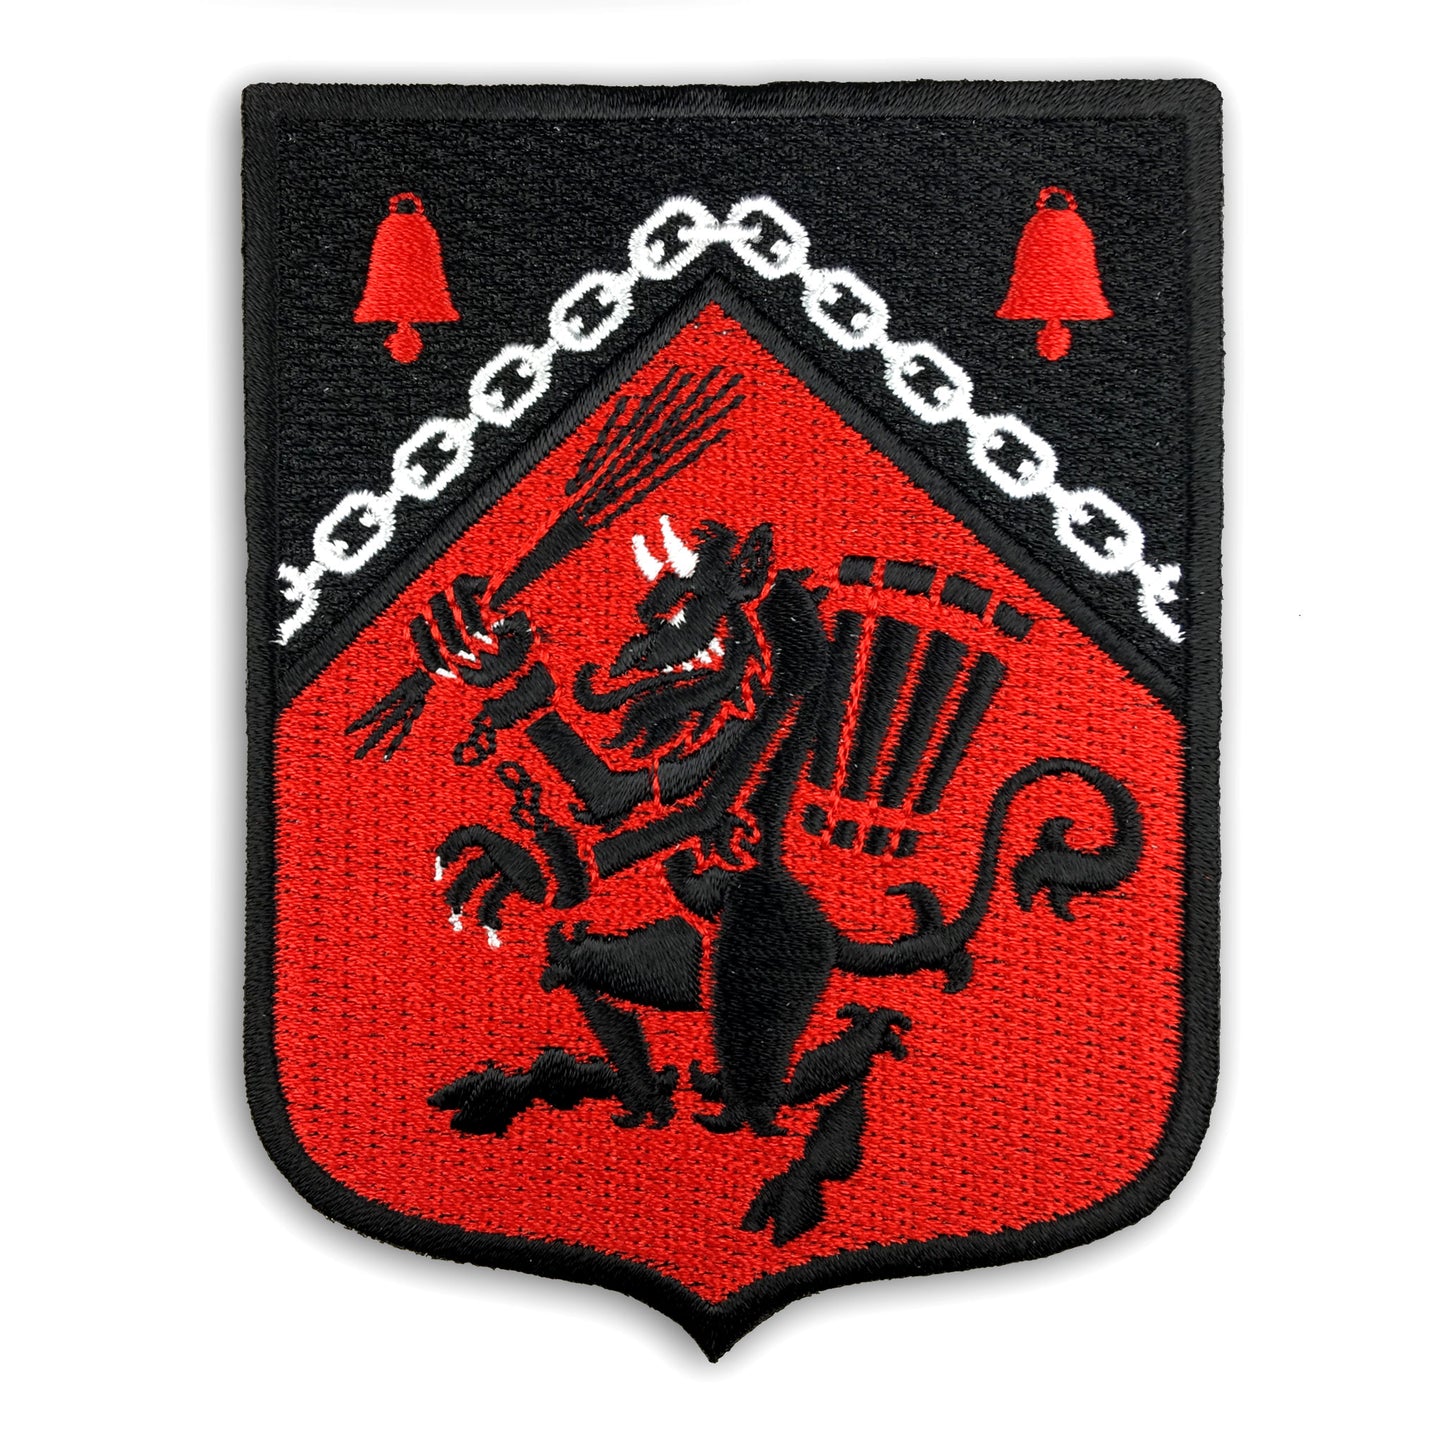 Krampus Rampant heraldic embroidered patch by Monsterologist